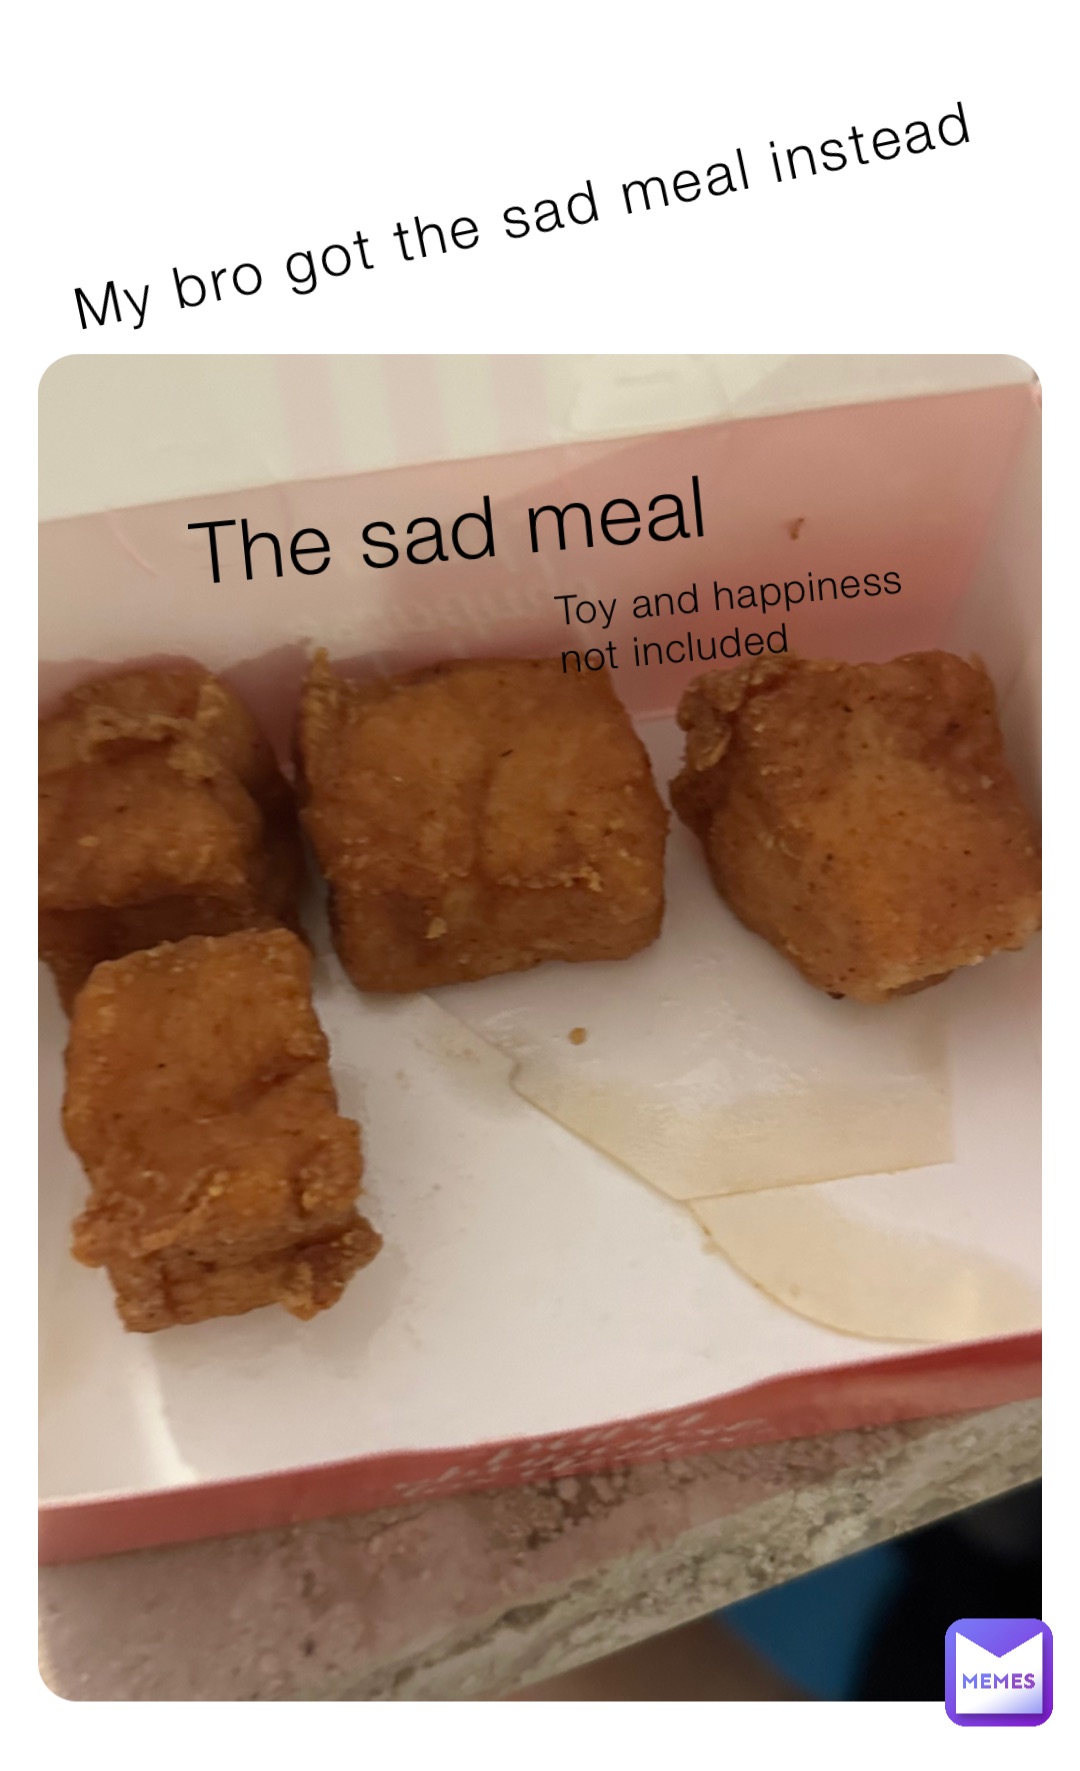 My bro got the sad meal instead The sad meal Toy and happiness not included